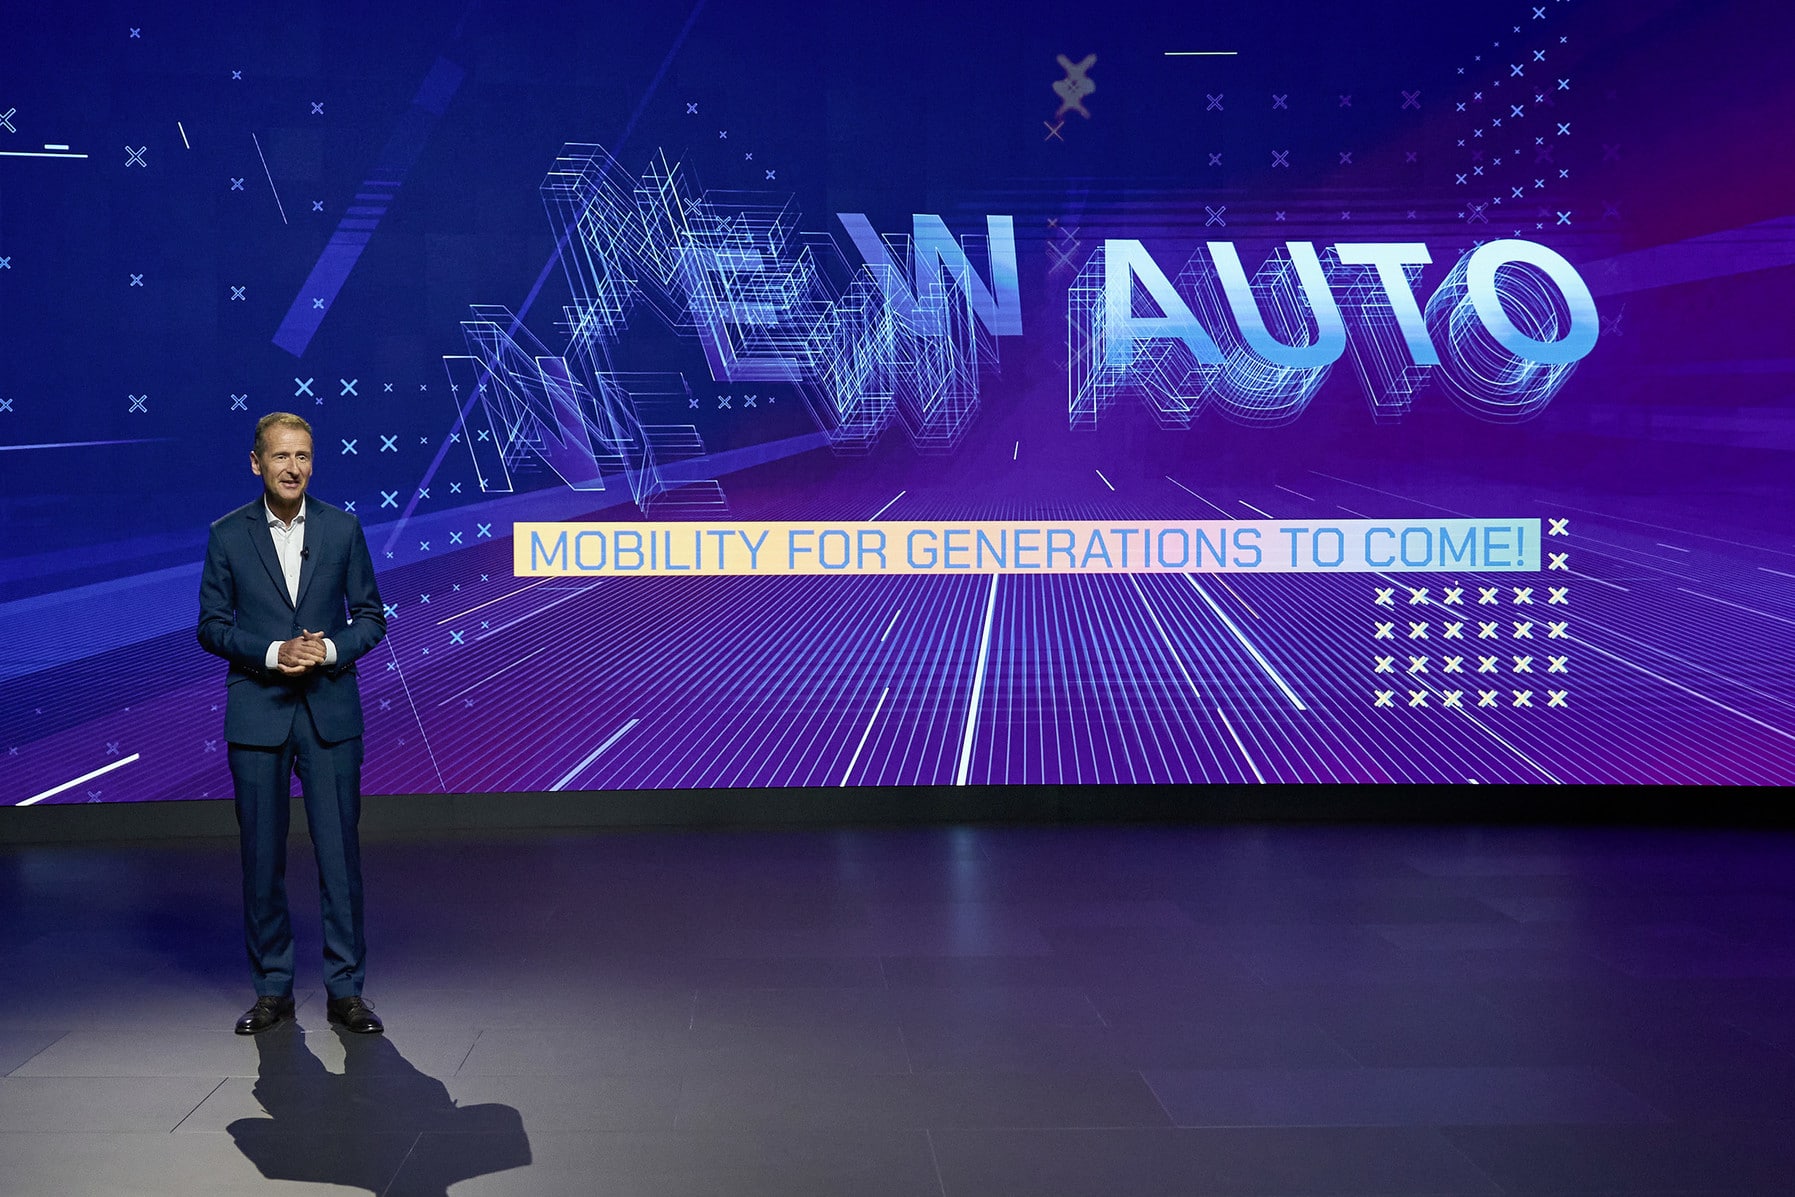 NEW AUTO: Volkswagen Group set to unleash value in battery-electric autonomous mobility world